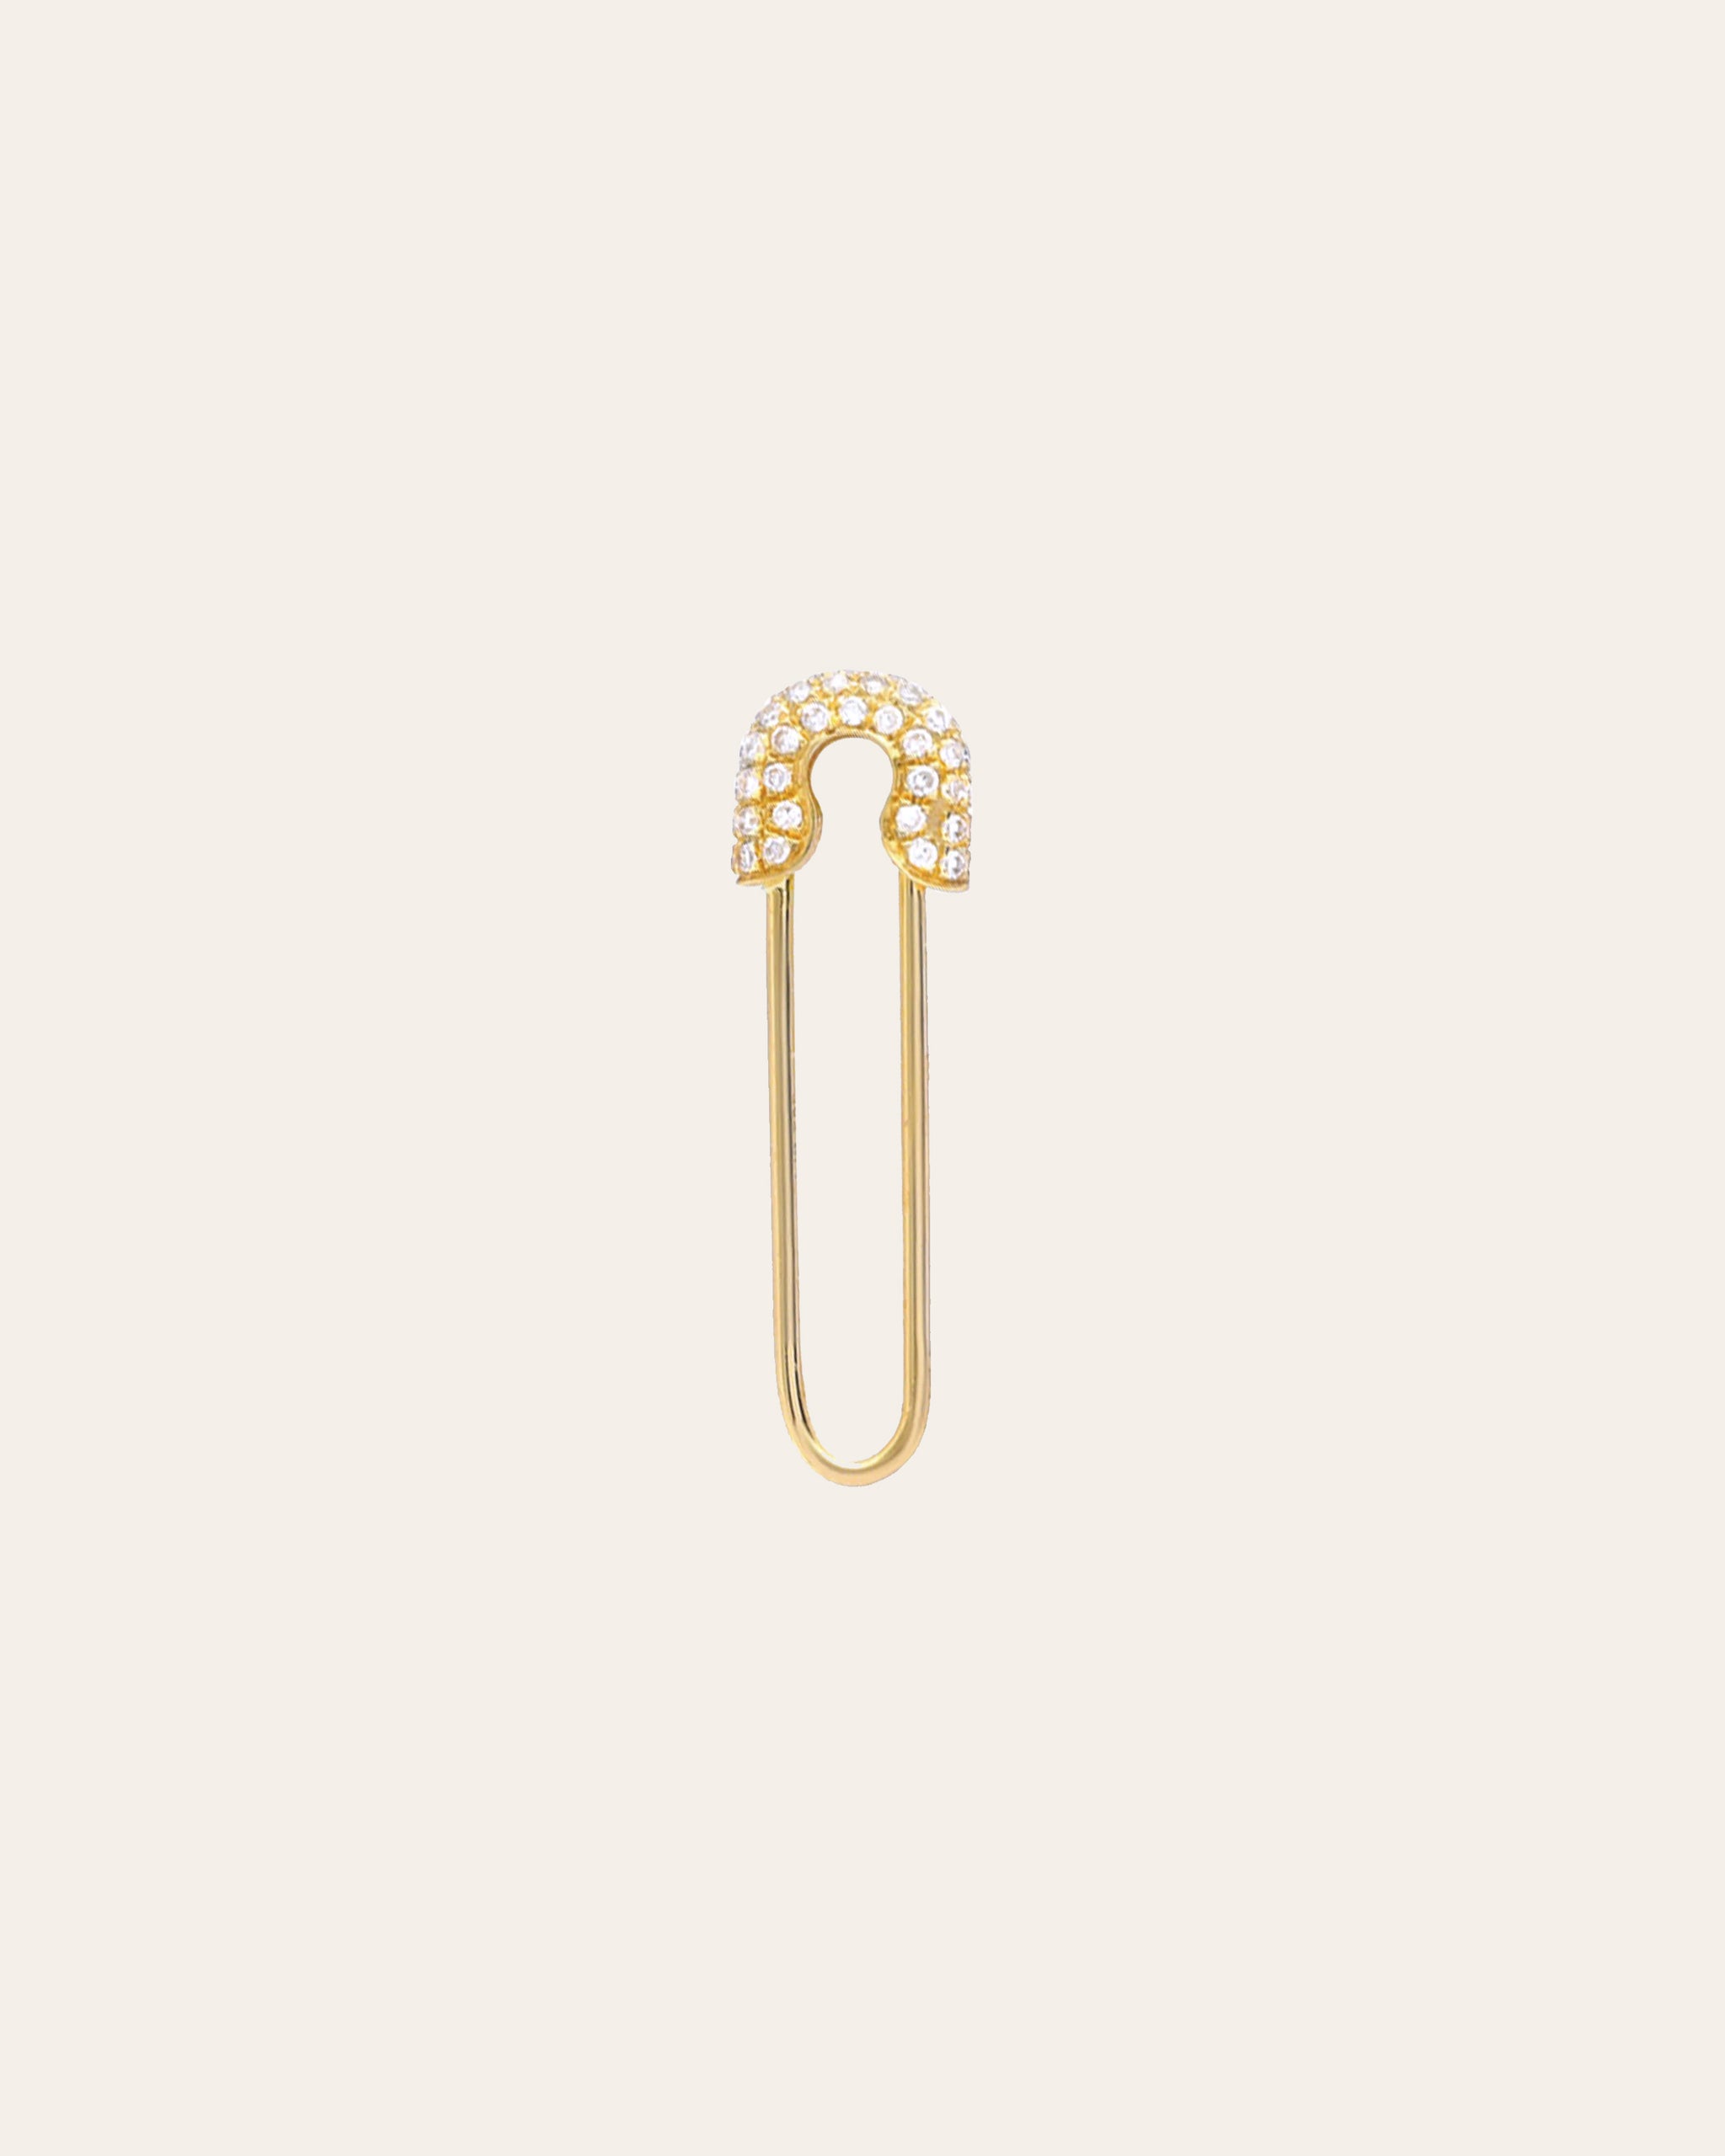 Black Diamond Safety Pin Earrings in 14K Rose Gold, 0.55 ct. t.w. - 100%  Exclusive